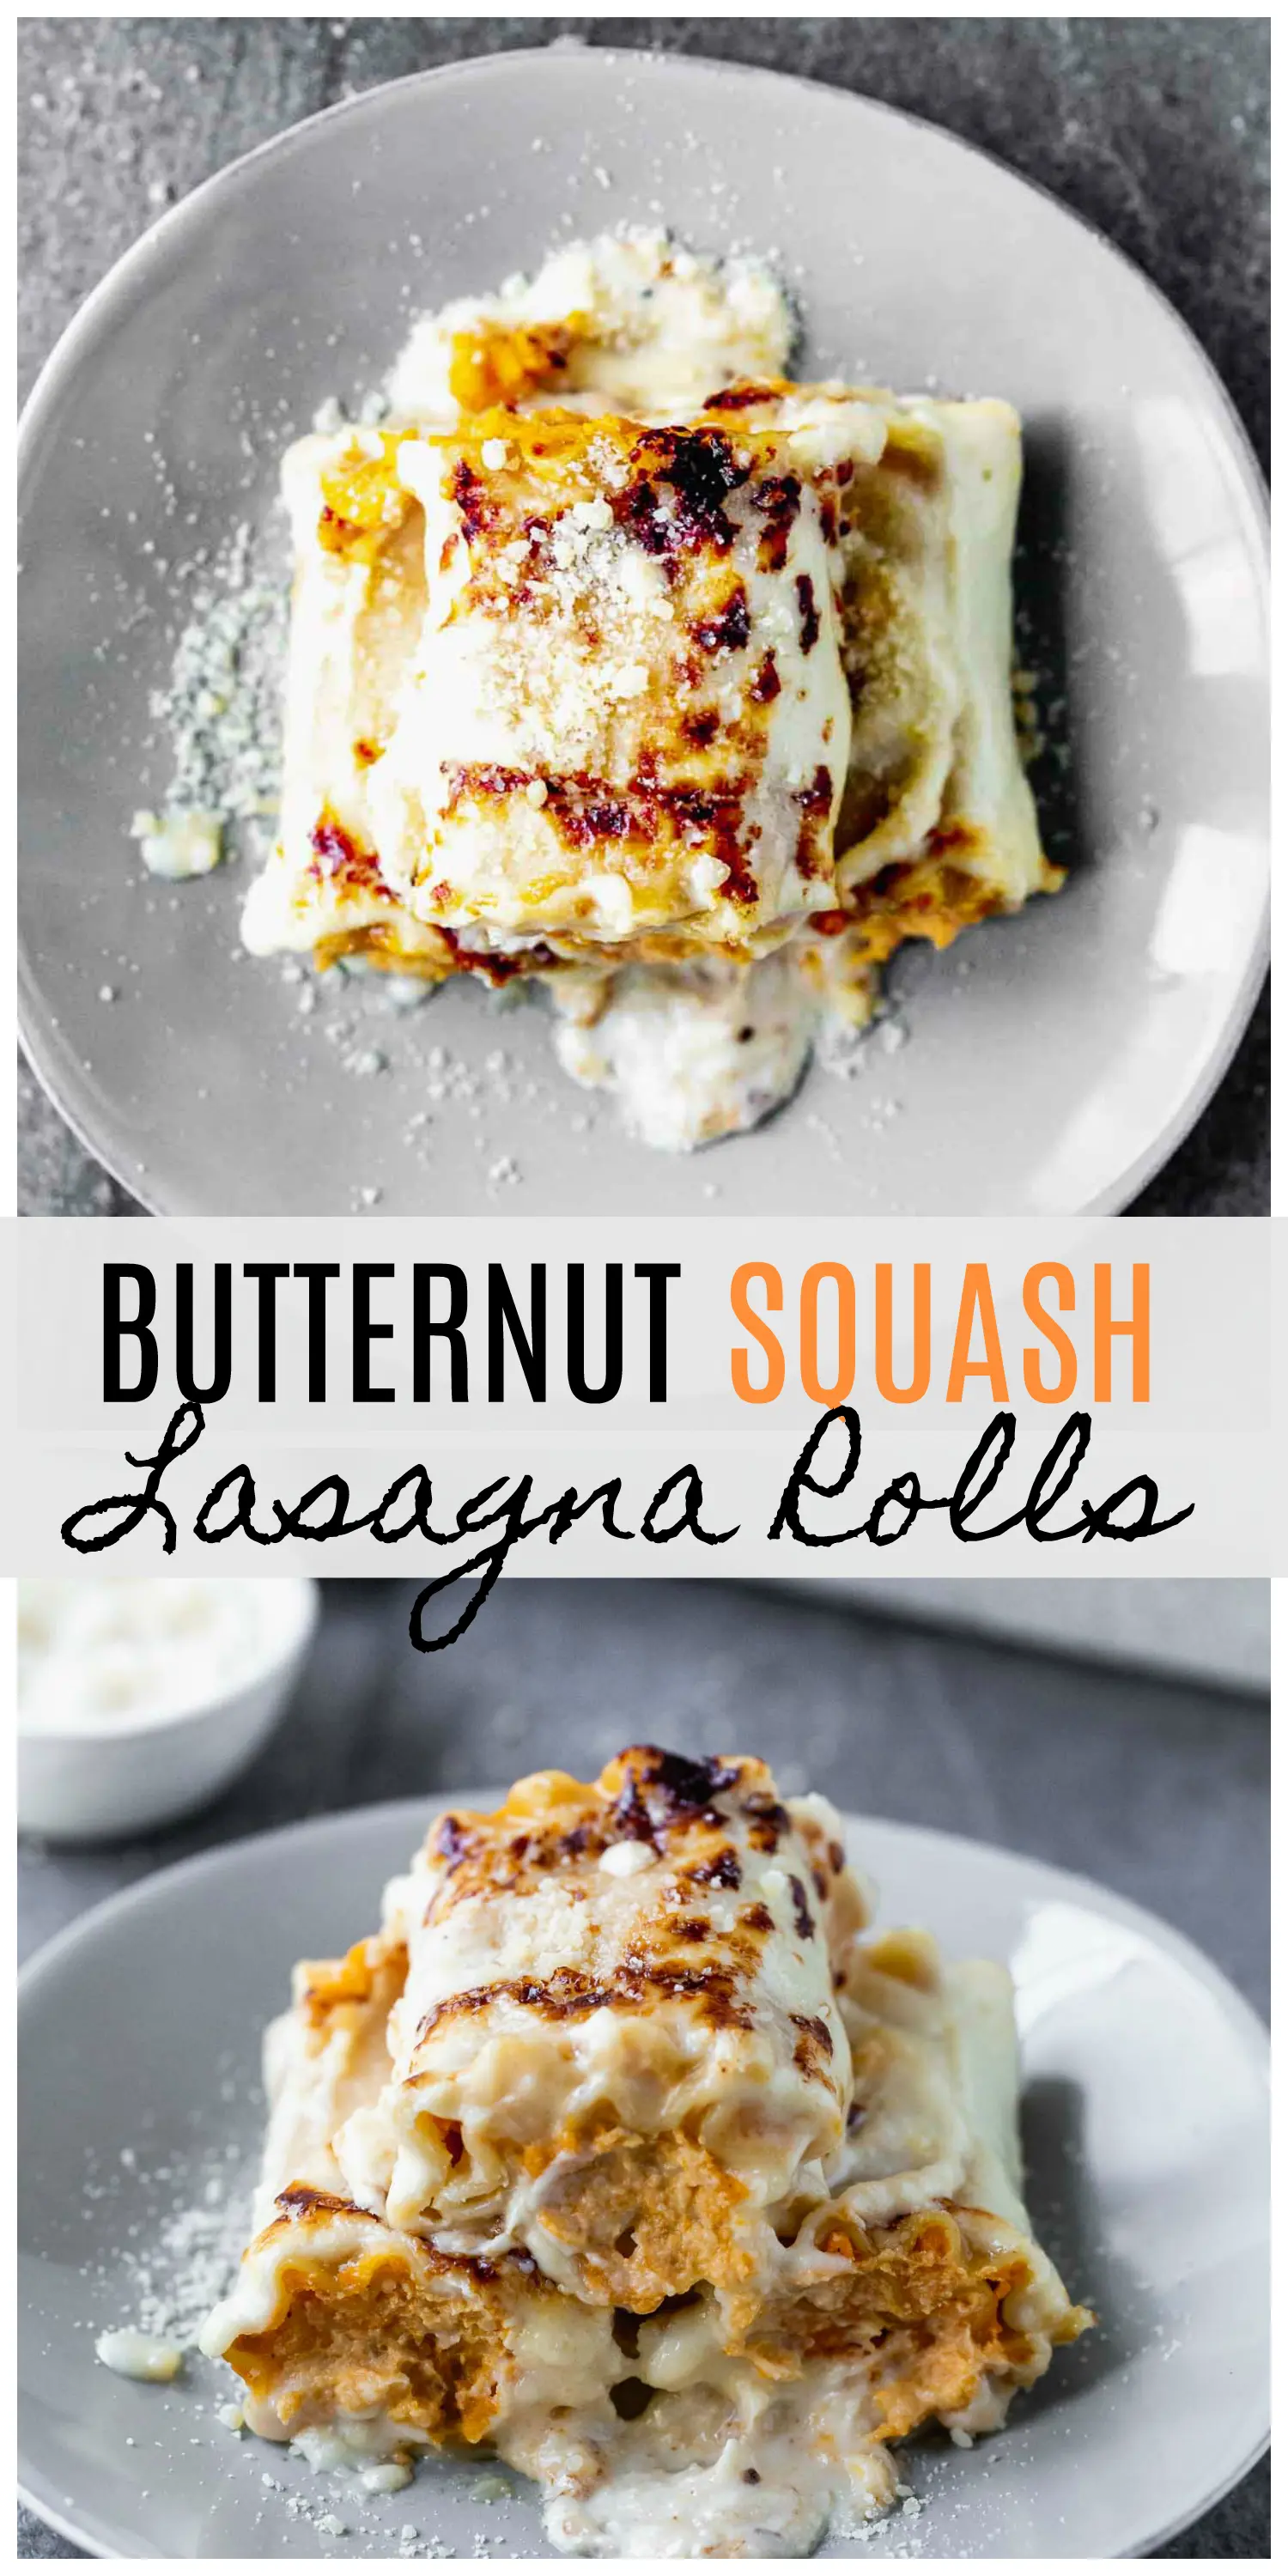 Butternut Squash Lasagna Rolls are cozy, rich and oh-so delicious. With only six ingredients, they're a cinch to throw together!